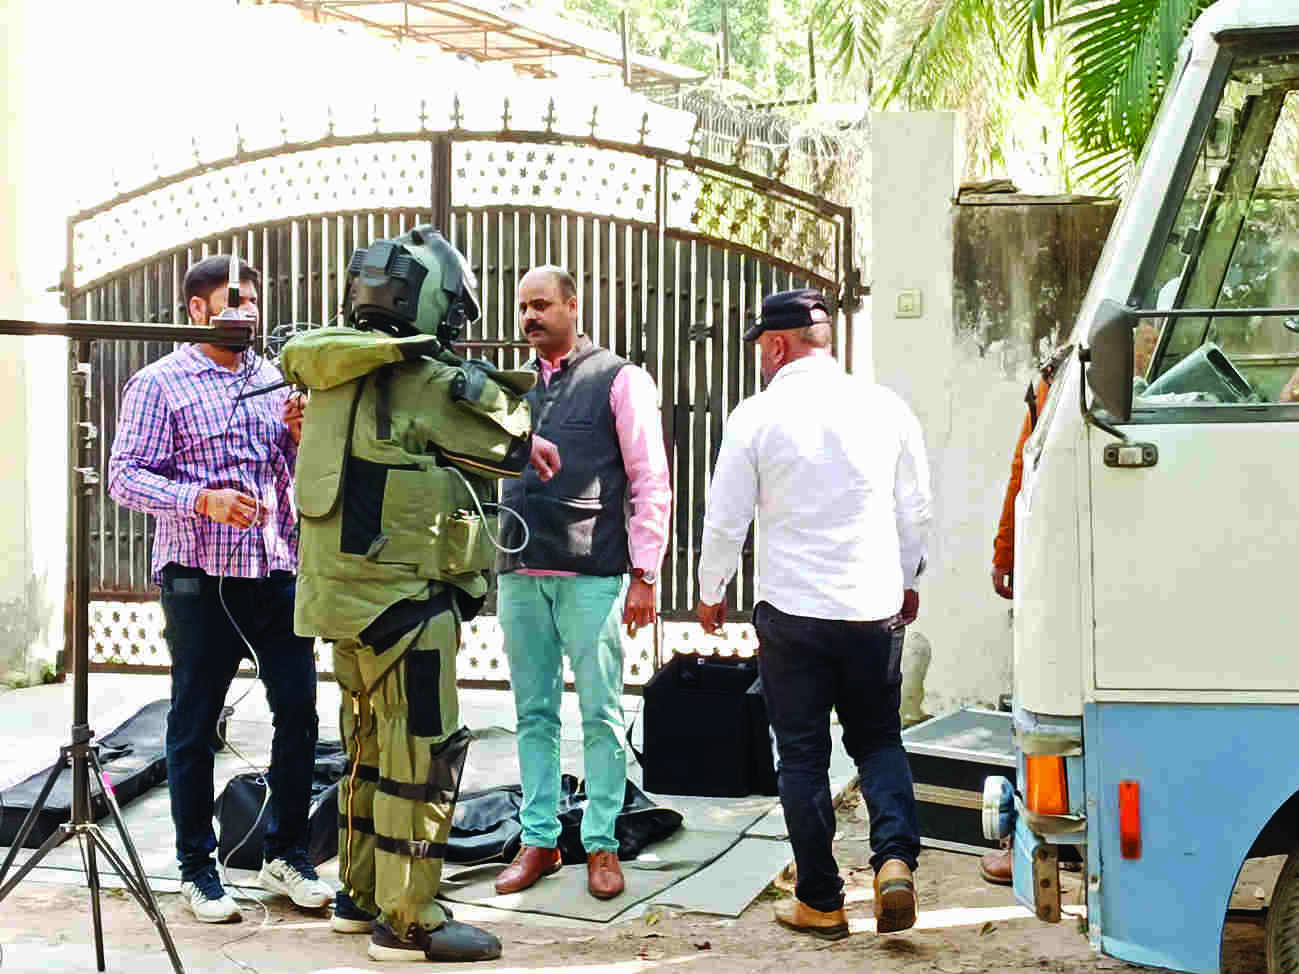 Two hand grenades,  17 training bombs  found in Ggm house